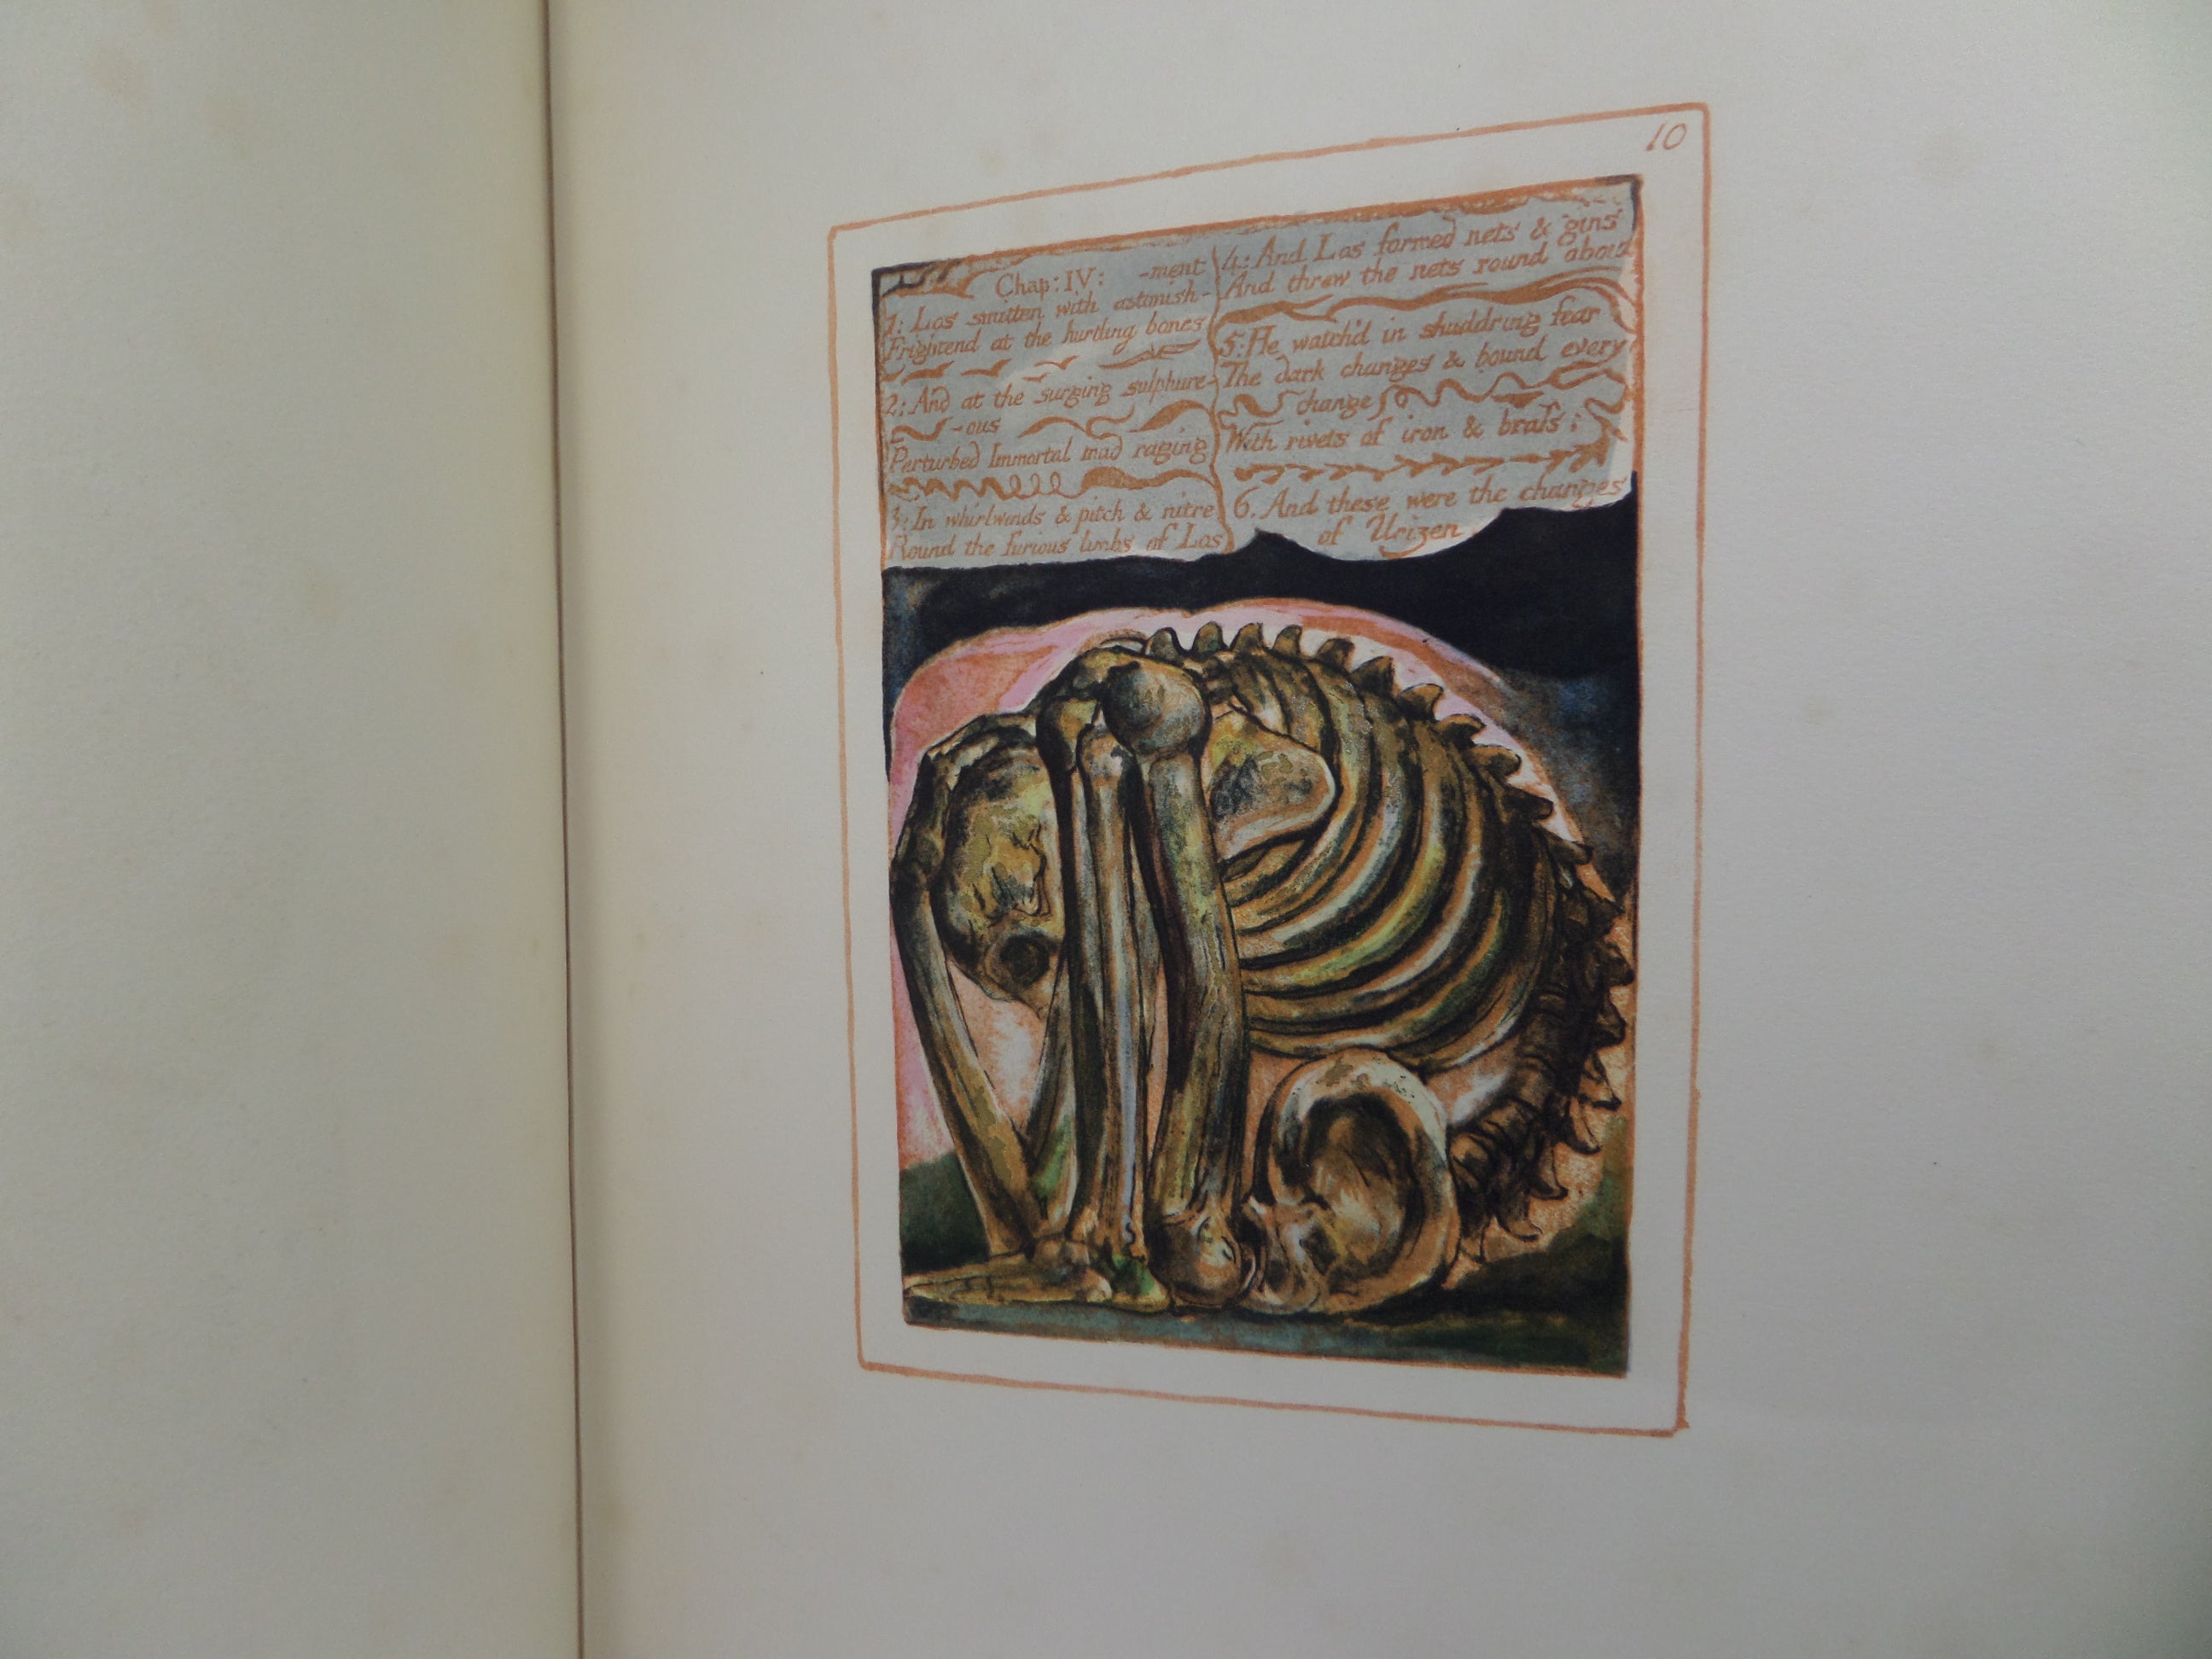 THE BOOK OF URIZEN BY WILLIAM BLAKE 1958 LIMITED EDITION